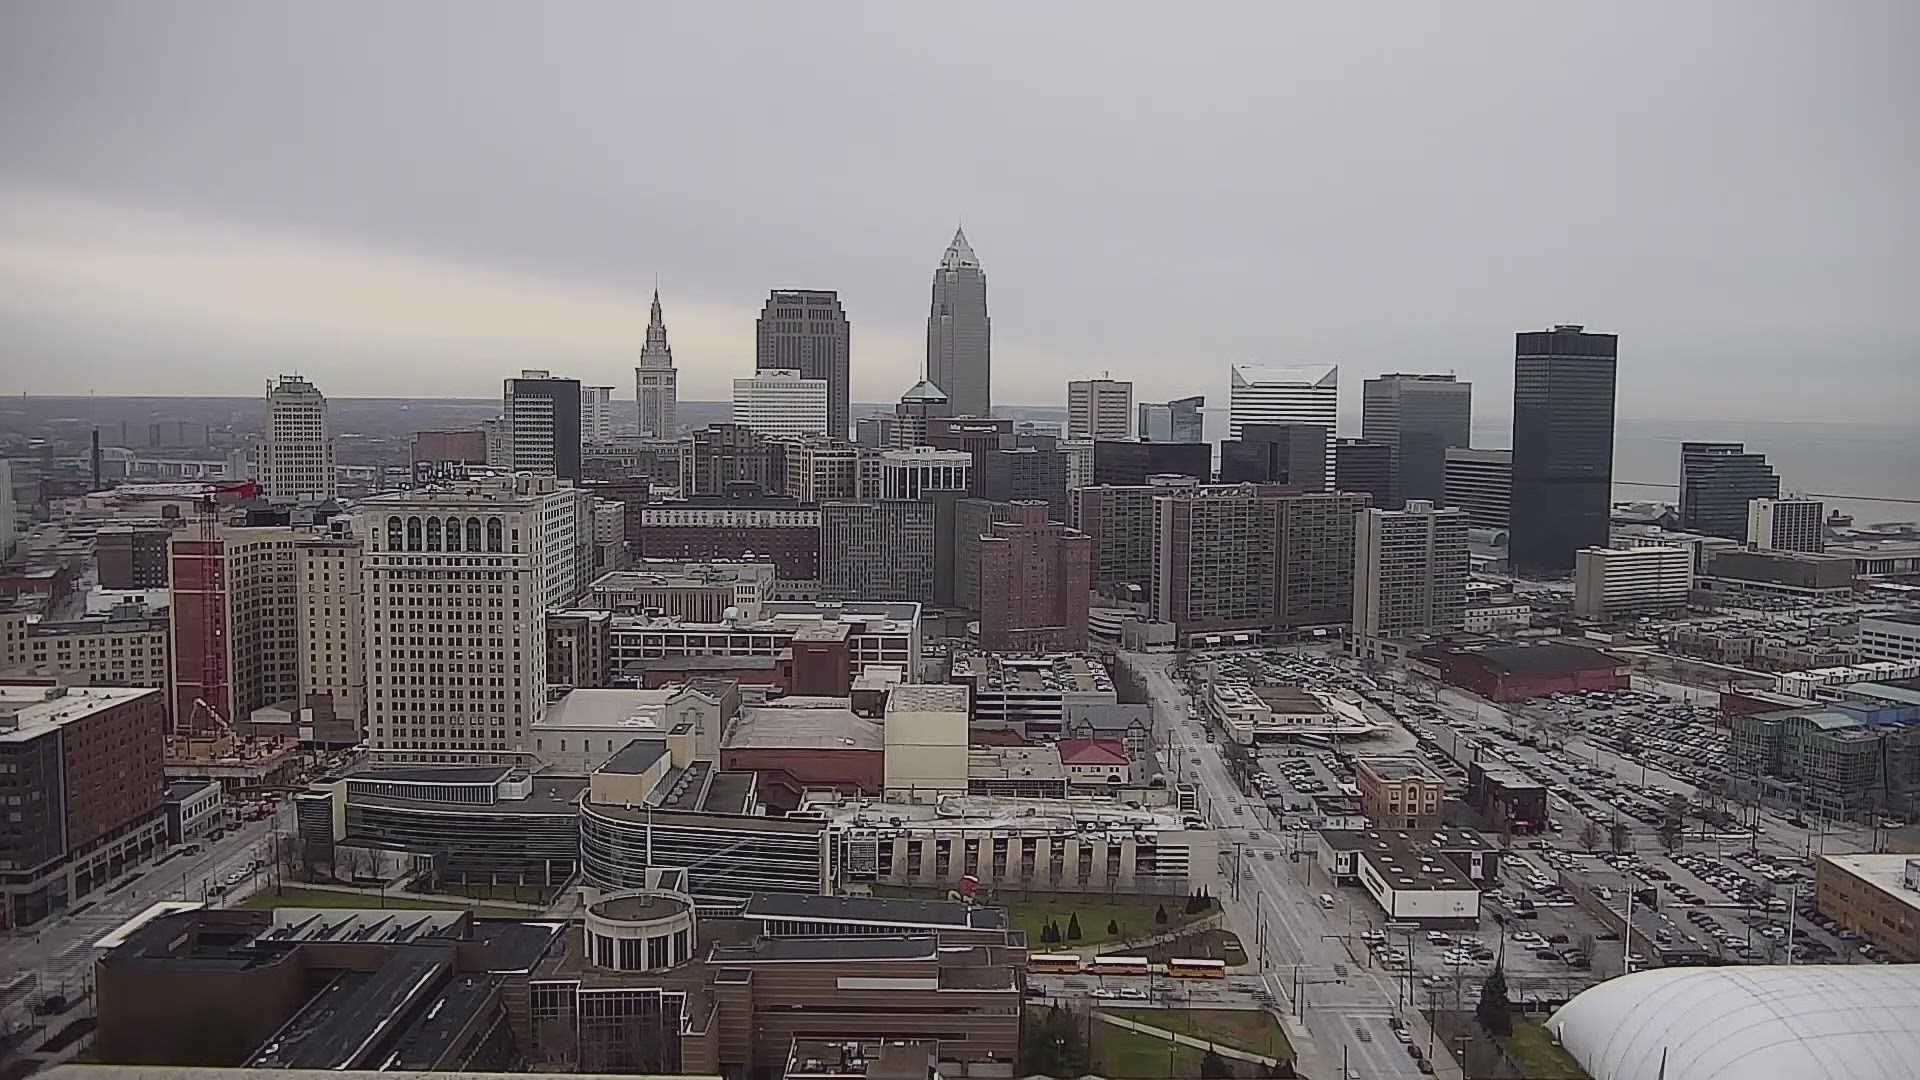 Clouds, clouds and more clouds across the Cleveland area on Thursday afternoon according to our Channel 3 CSU Skycam. #3weather #winterblues